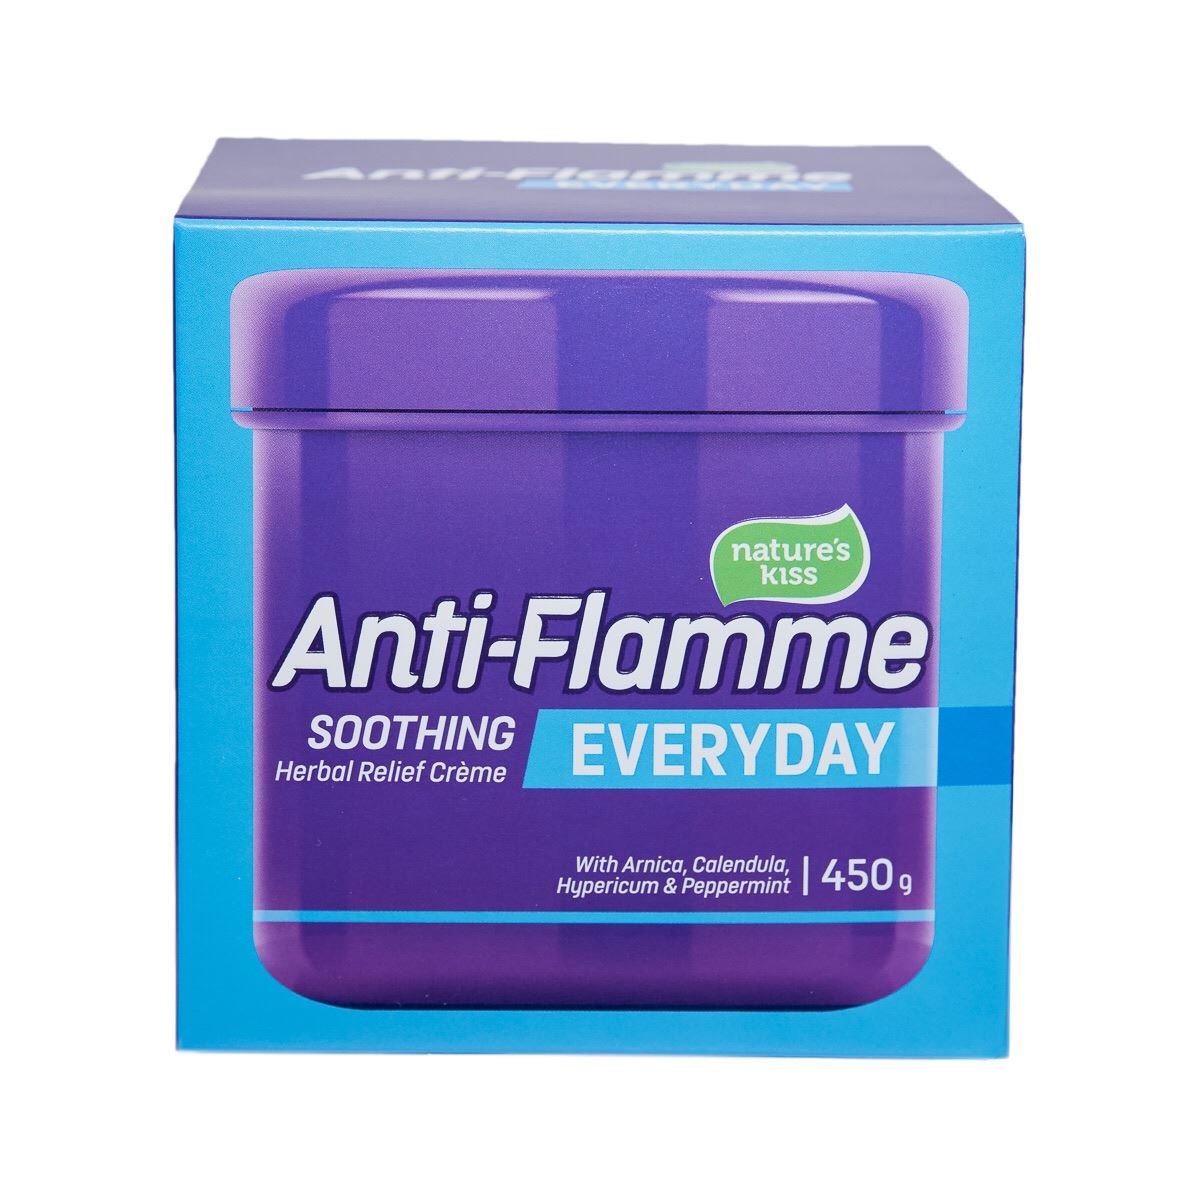 Anti-Flamme Herbal Relief Creme 450g